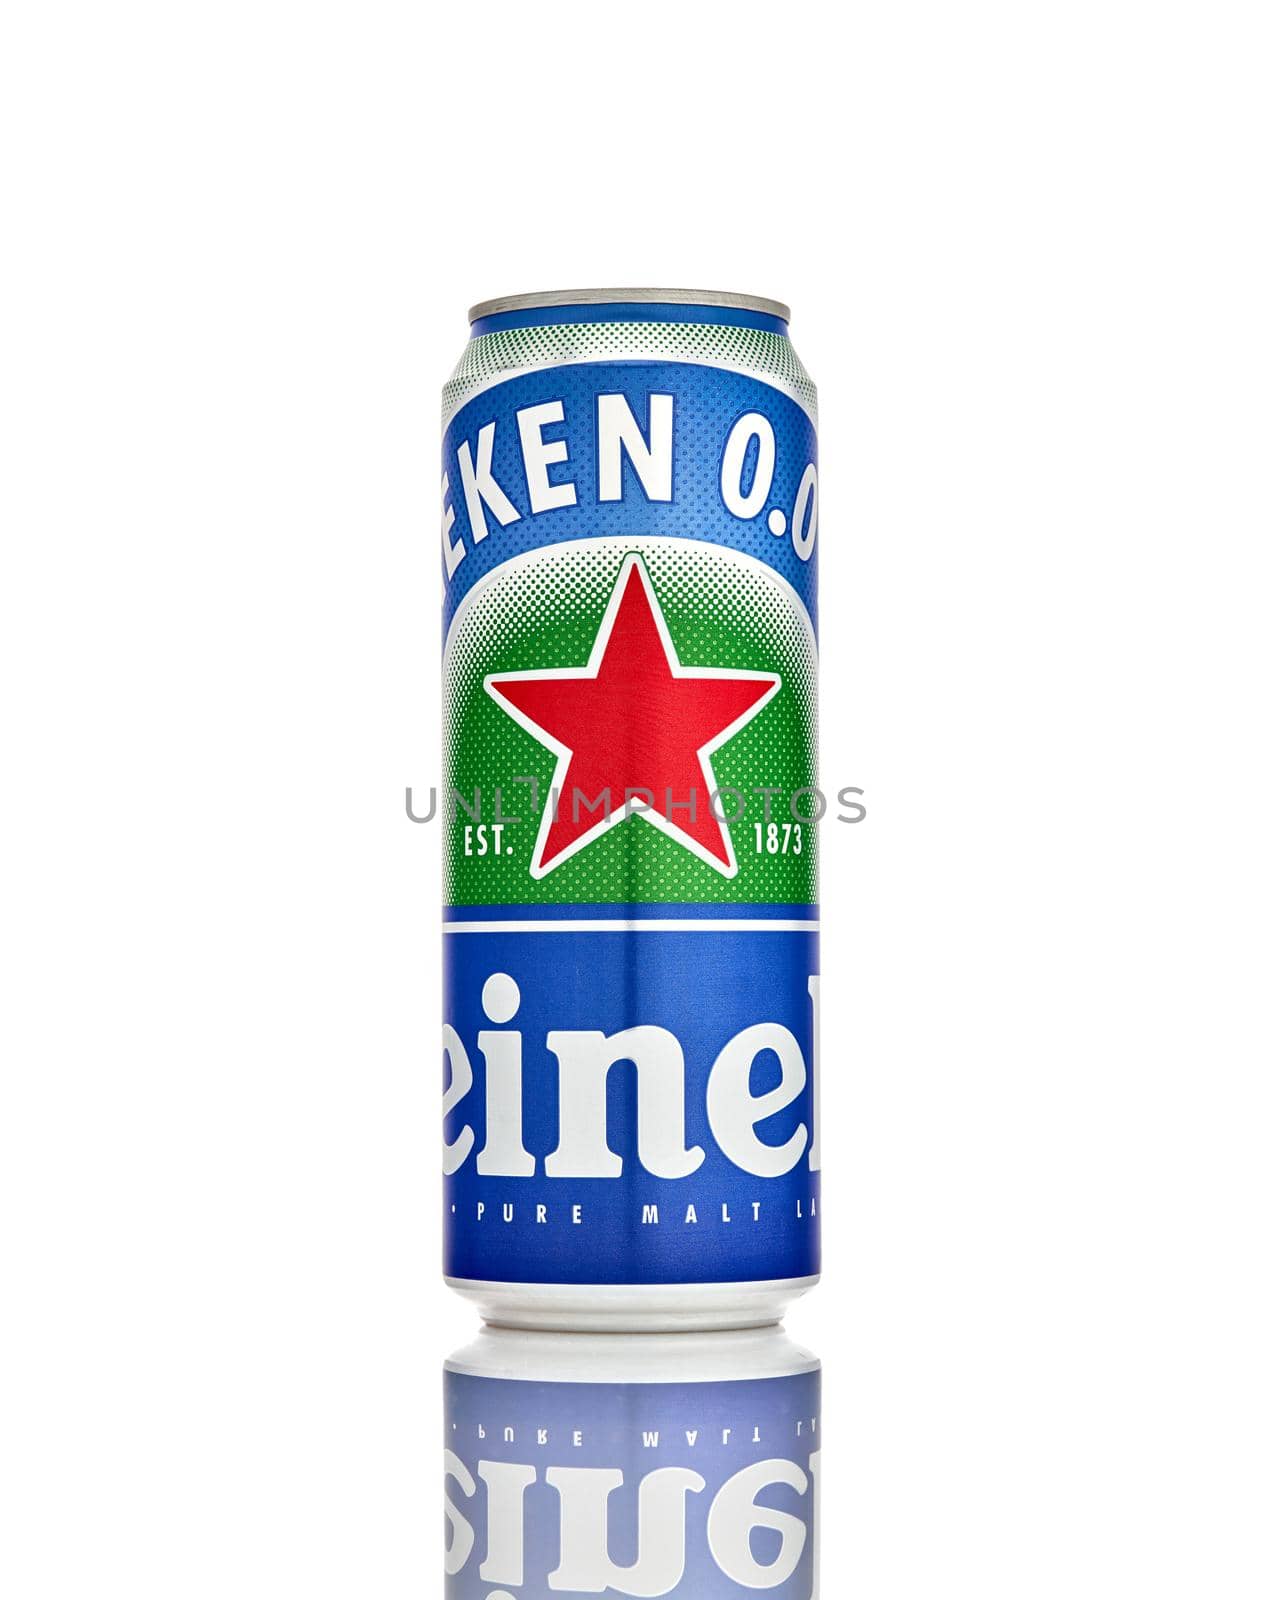 Can of Heineken 0.0 Alcohol Free Beer isolated on white background, produced by the Dutch brewing company Heineken International. 21.06.2019, Rostov-on-Don, Russia. by EvgeniyQW